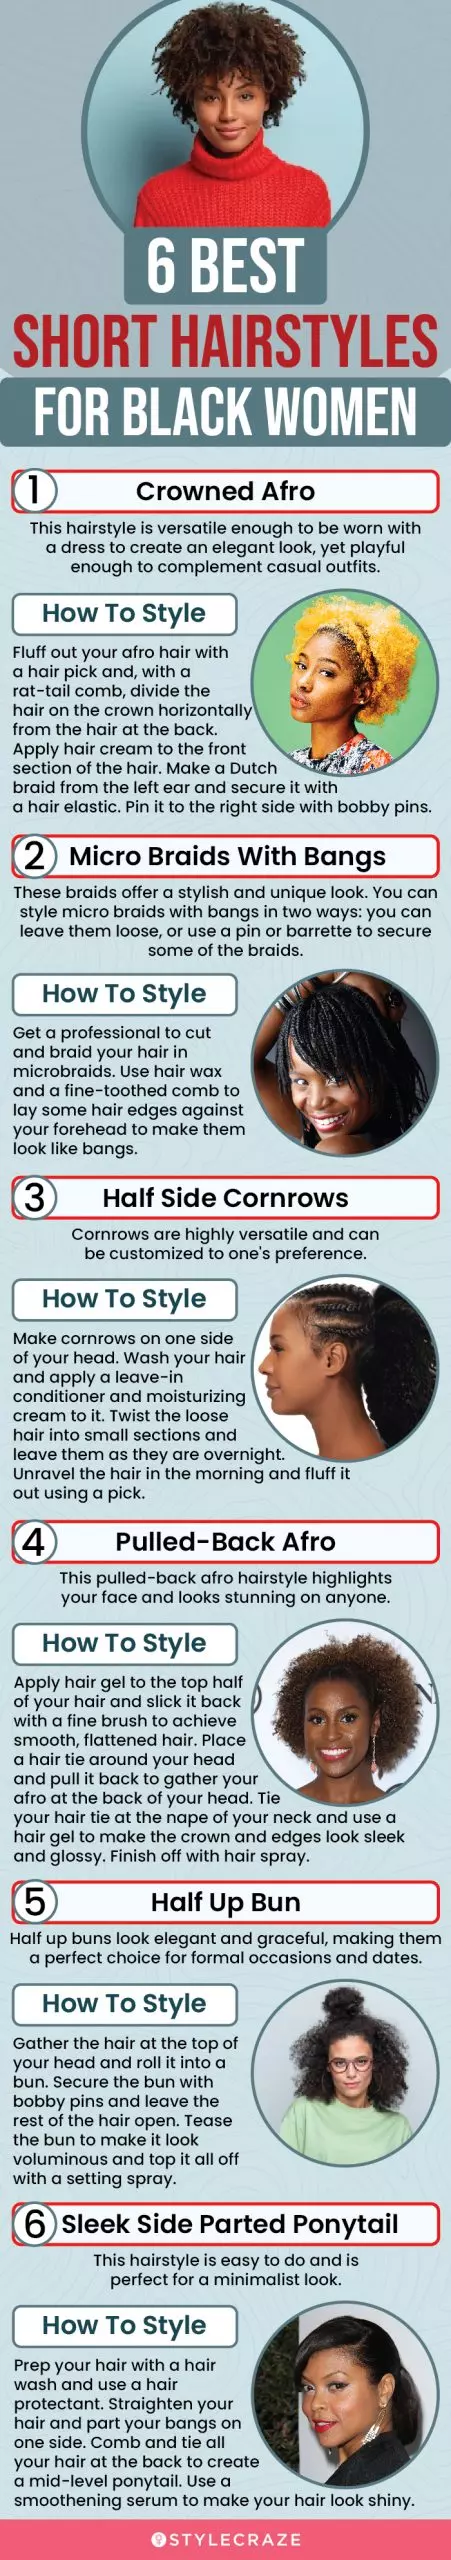 6 best short hairstyles for black women (infographic)